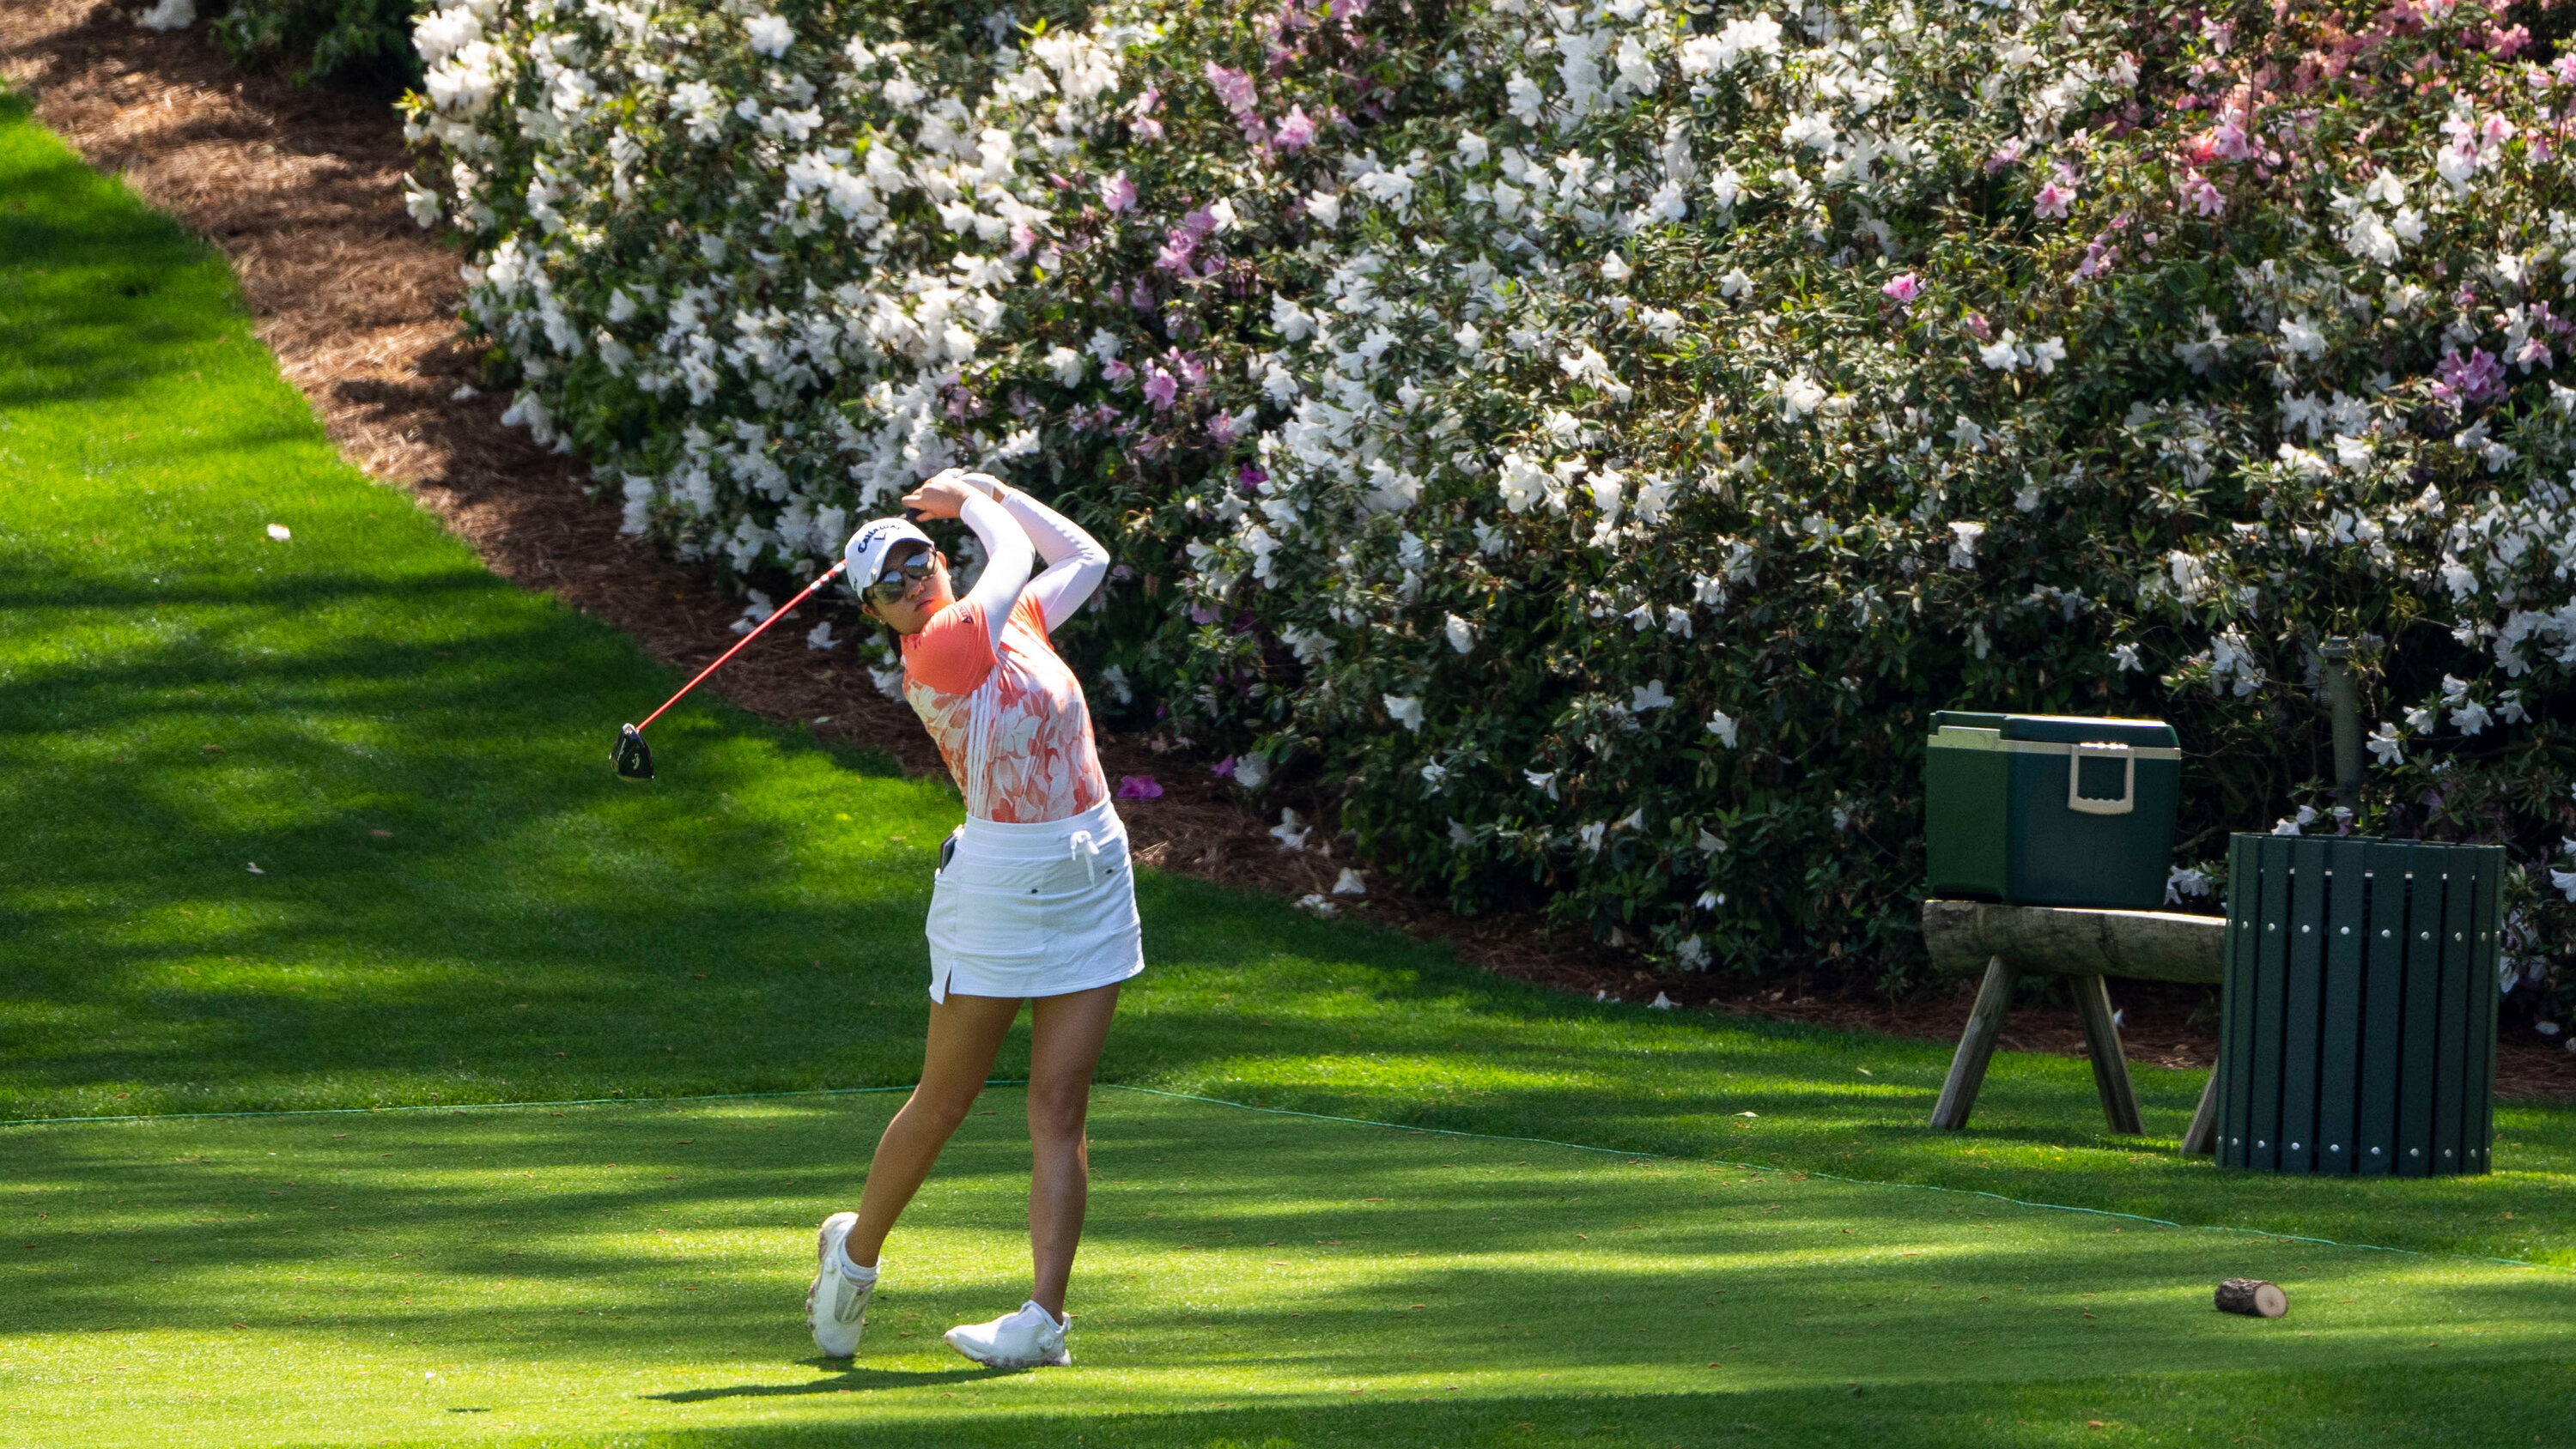 Stanford Golf Star Rose Zhang Is Ready for Her Professional Debut The